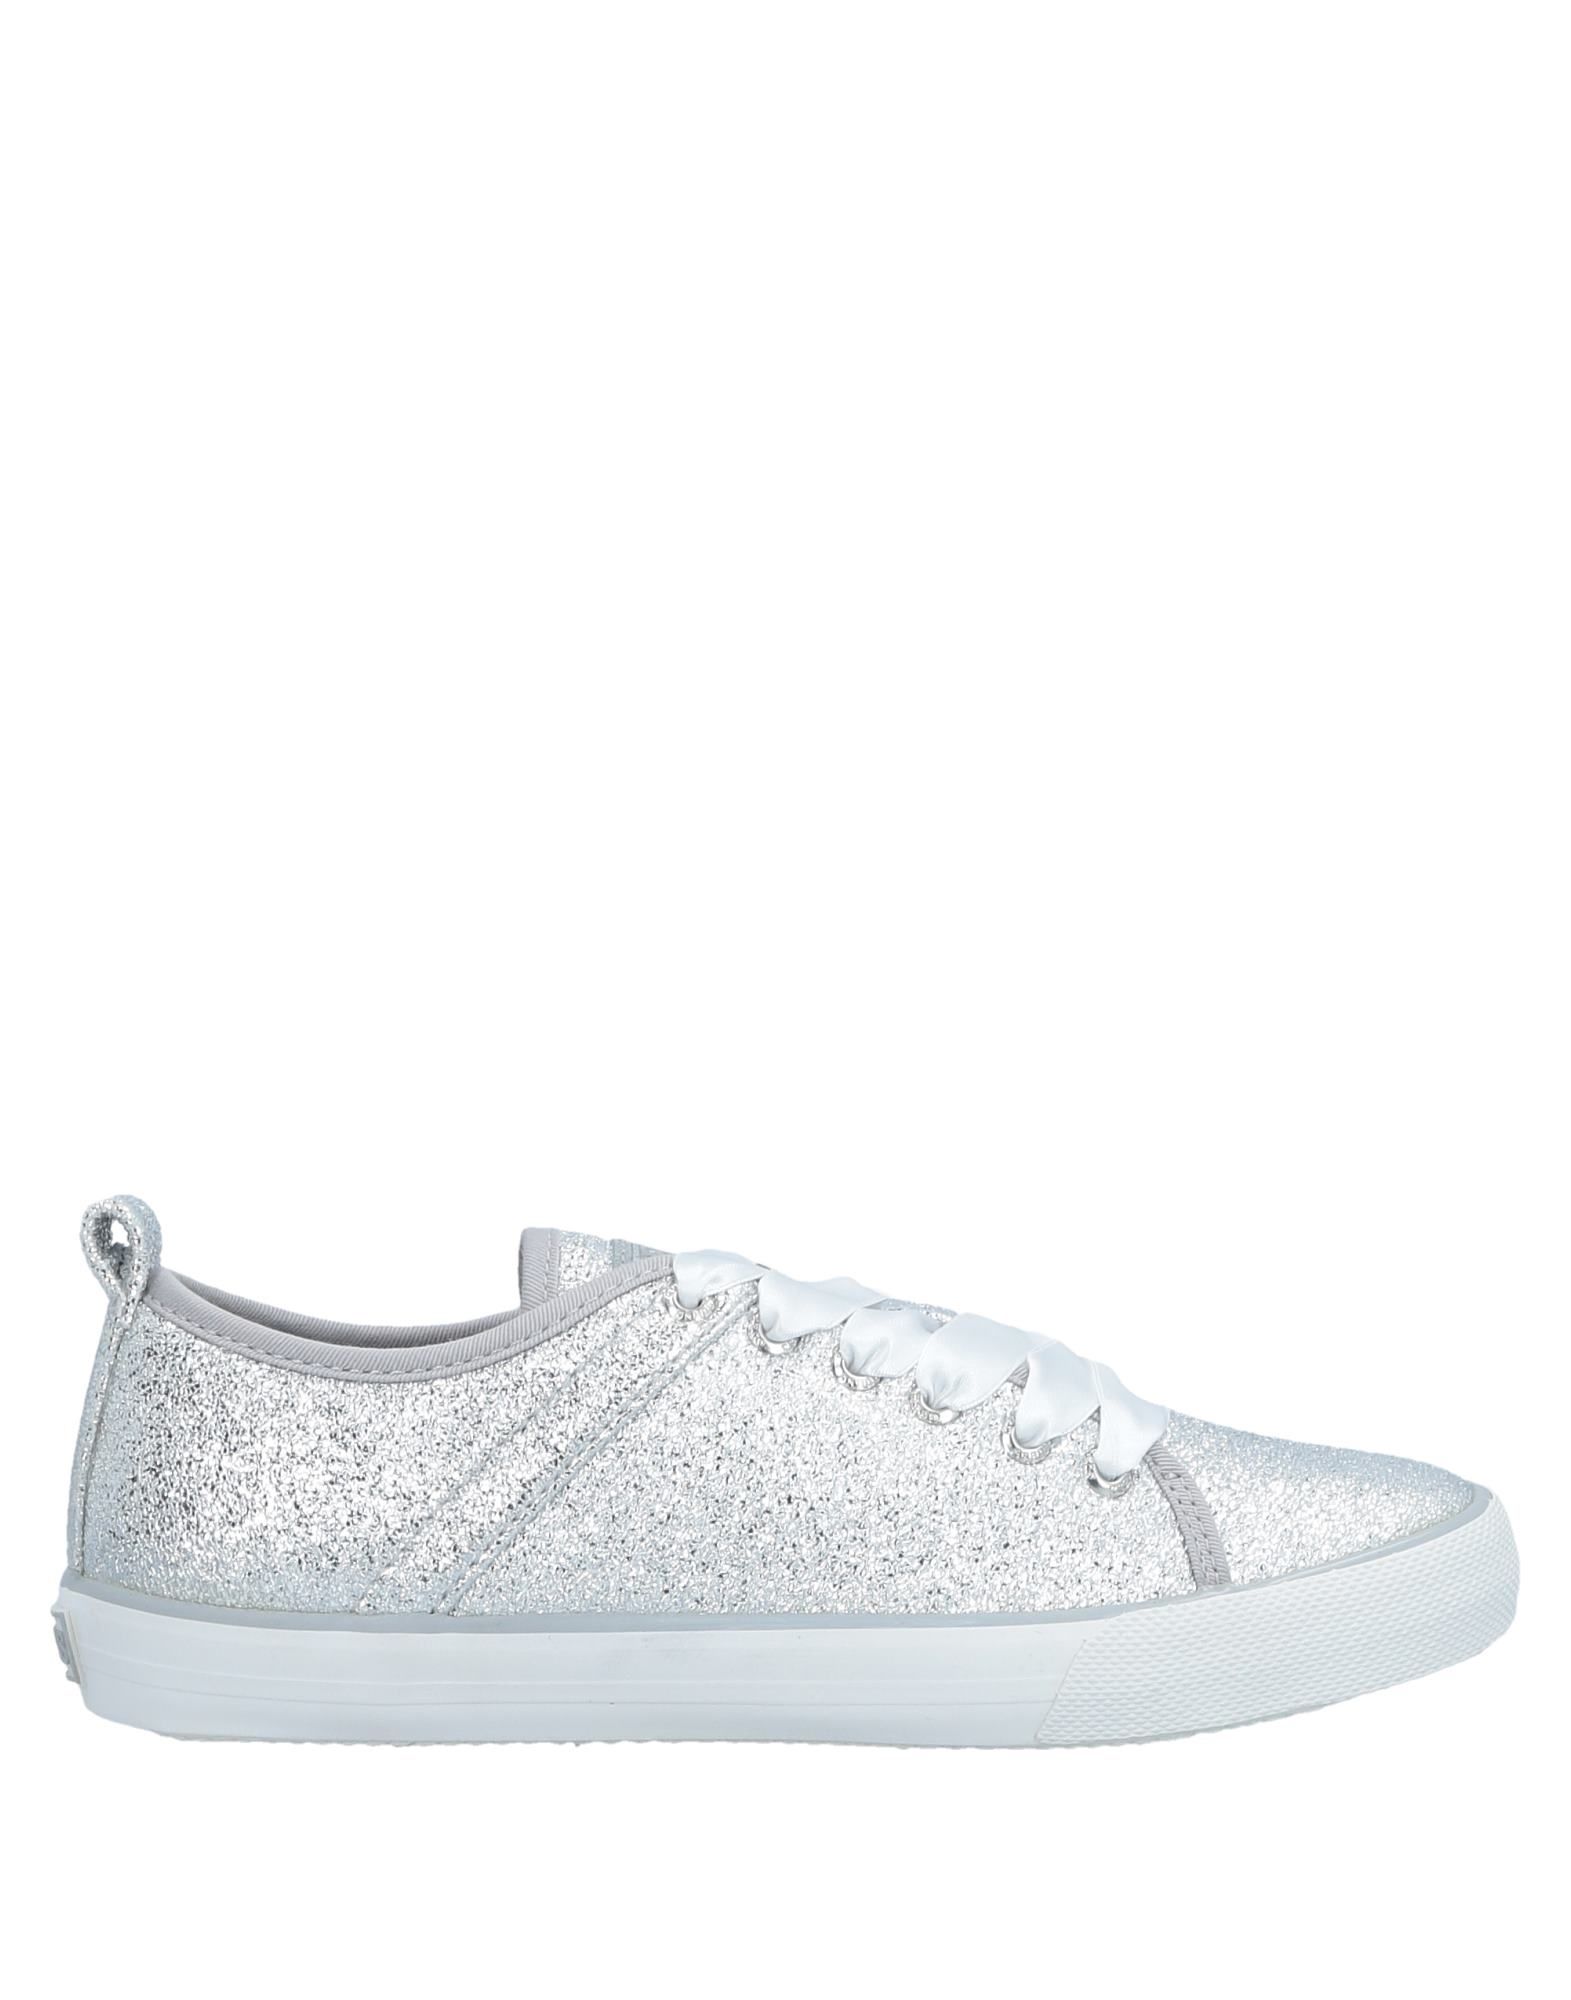 Guess Sneakers In Silver | ModeSens